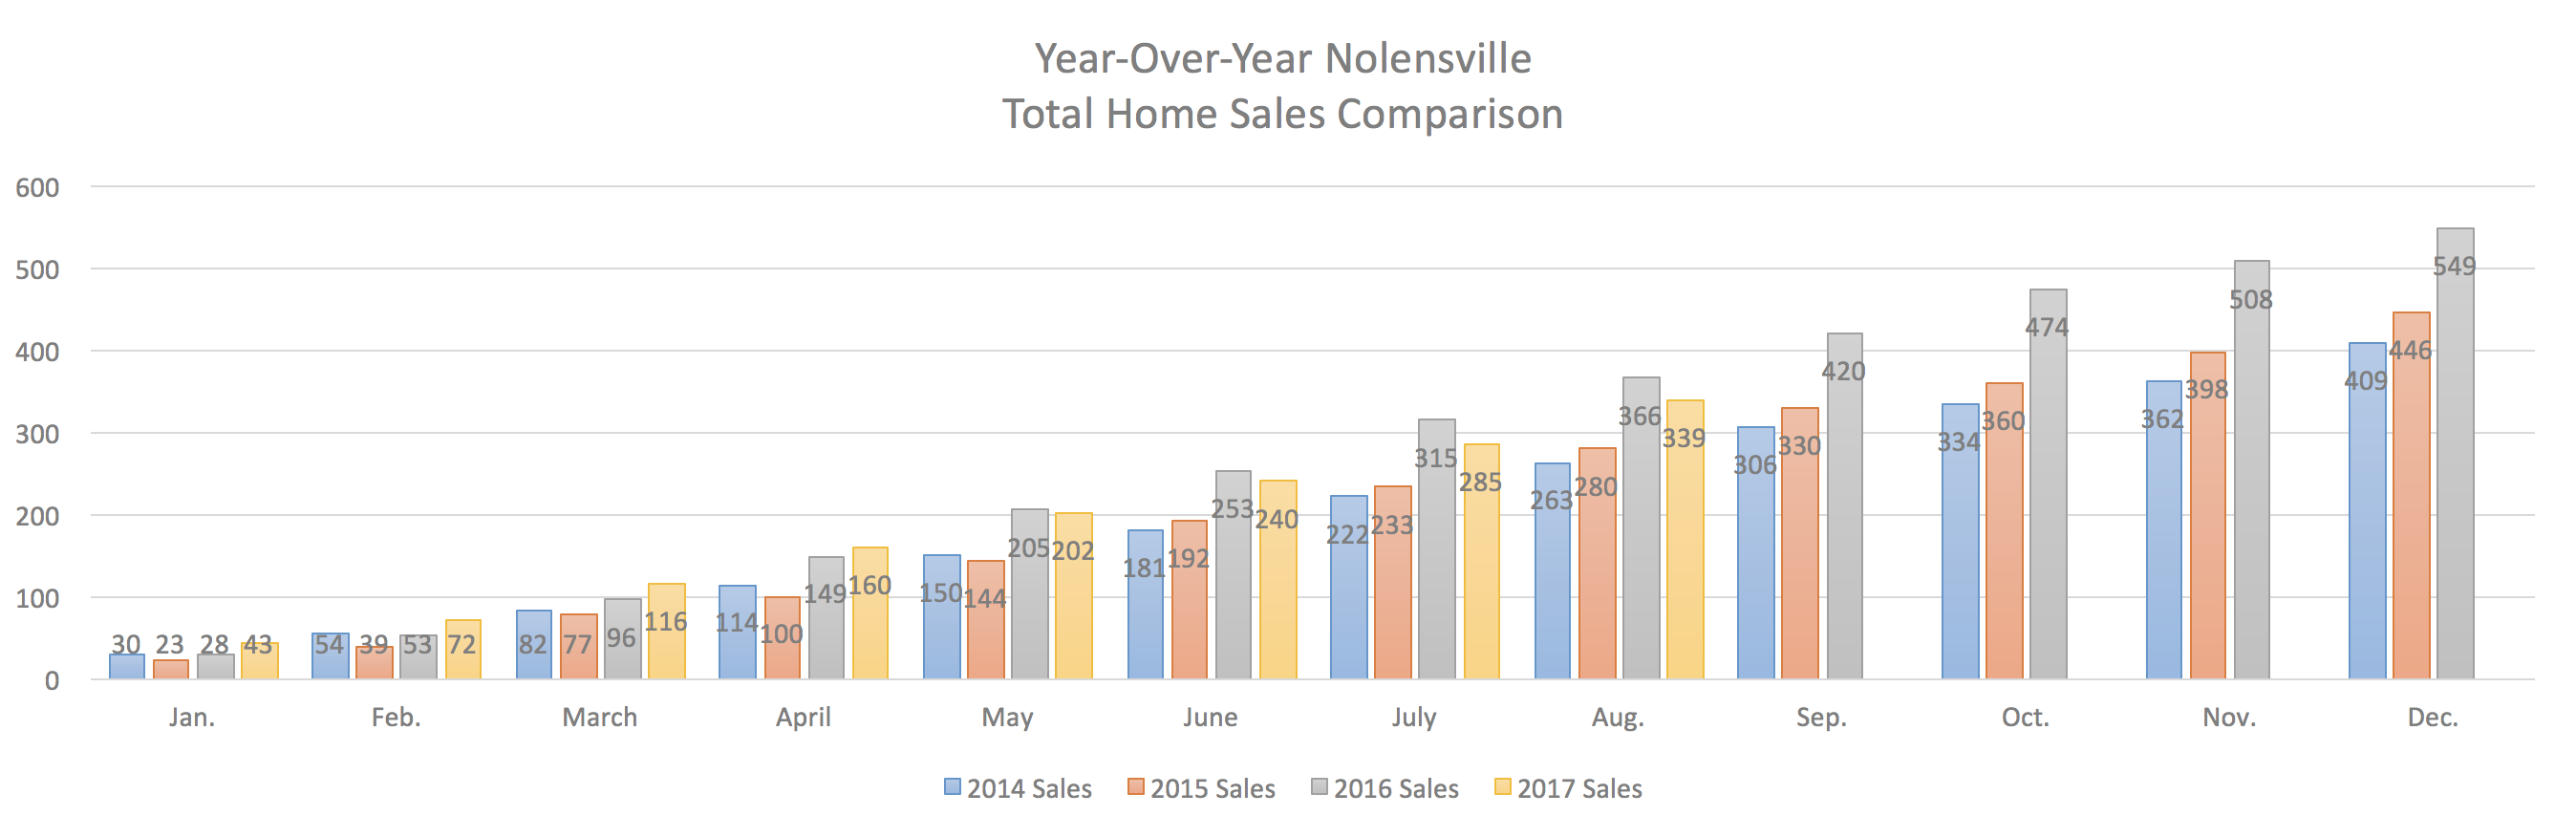 Nolensville Year-Over-Year Home Sales Through August 2017